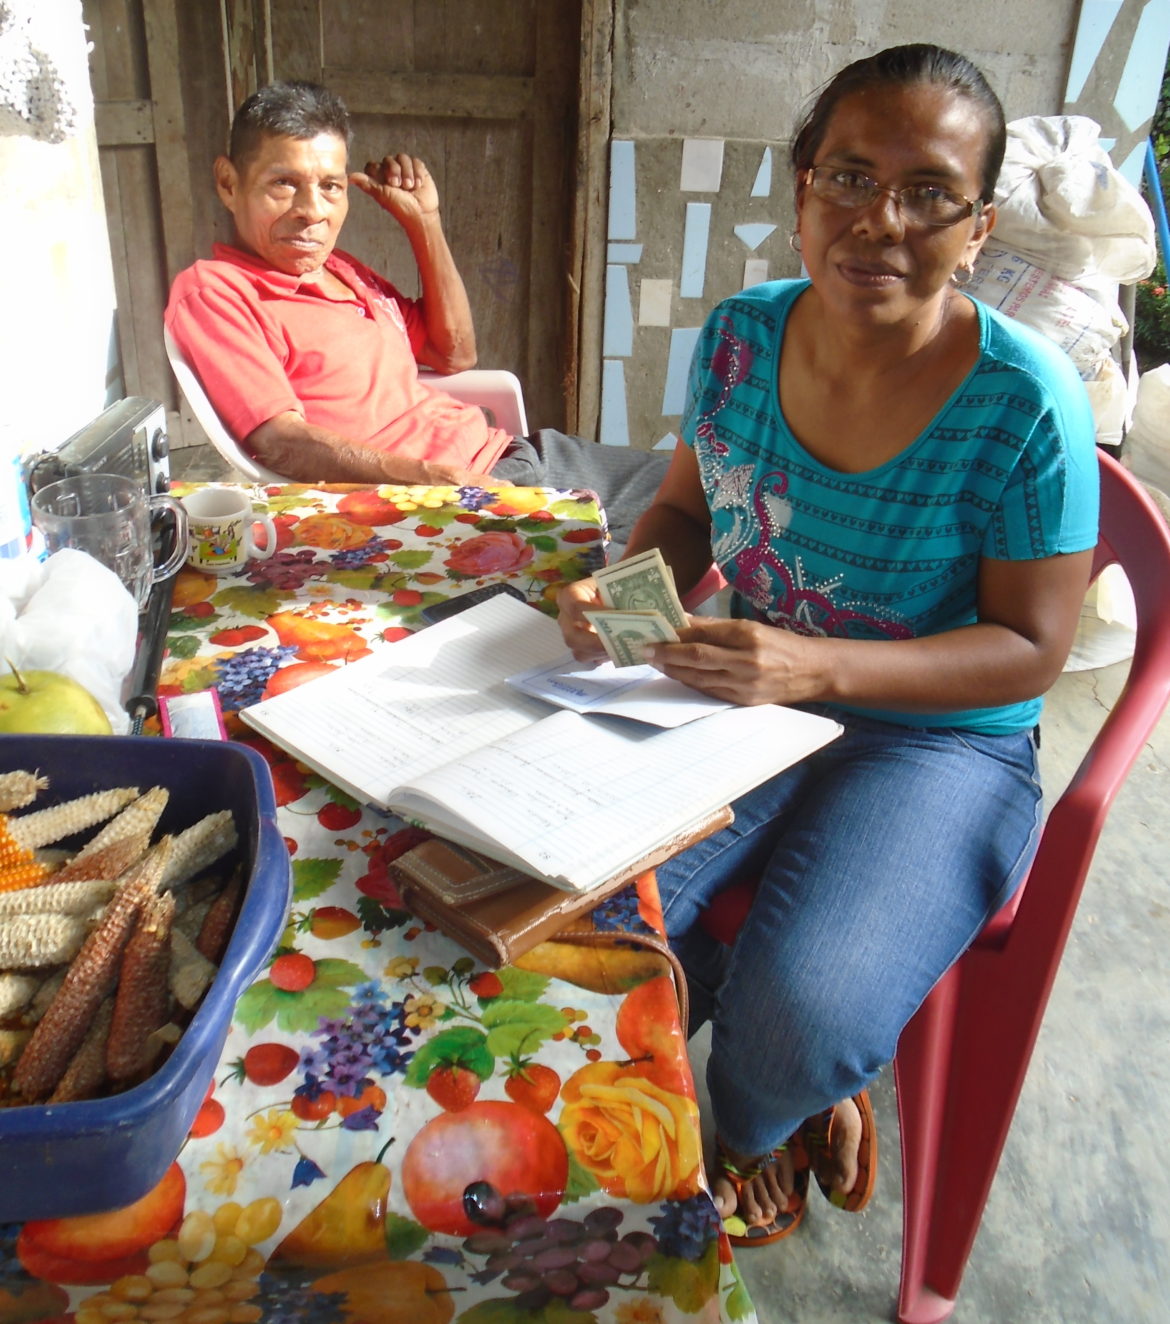 As treasurer of the rural bank Sustainable Harvest International helped found in Los Alonsos, Panama, Nancy Alonso (right) connects community members to micro-loans for income-generating projects. Photo by Dayra Julio.